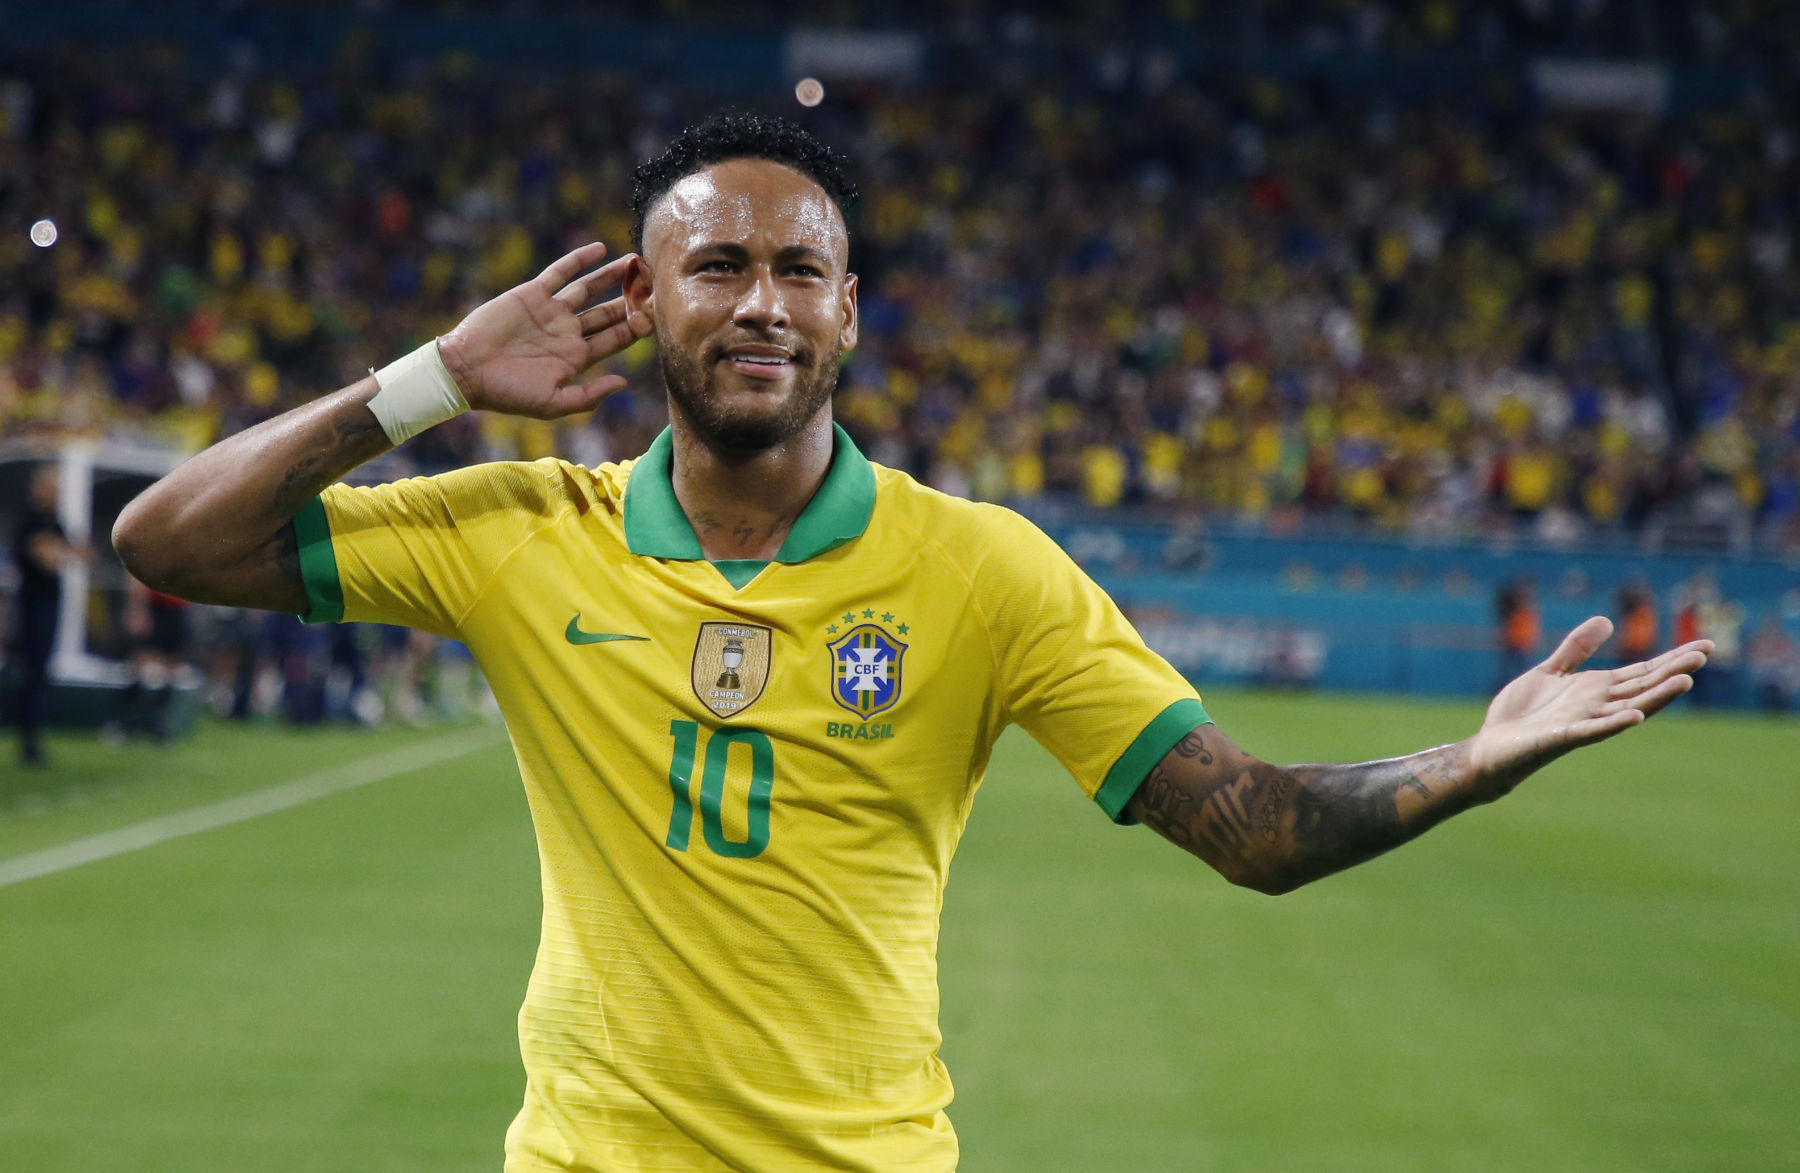 Neymar Made History Becoming The Top Goal Scorer For Brasil After